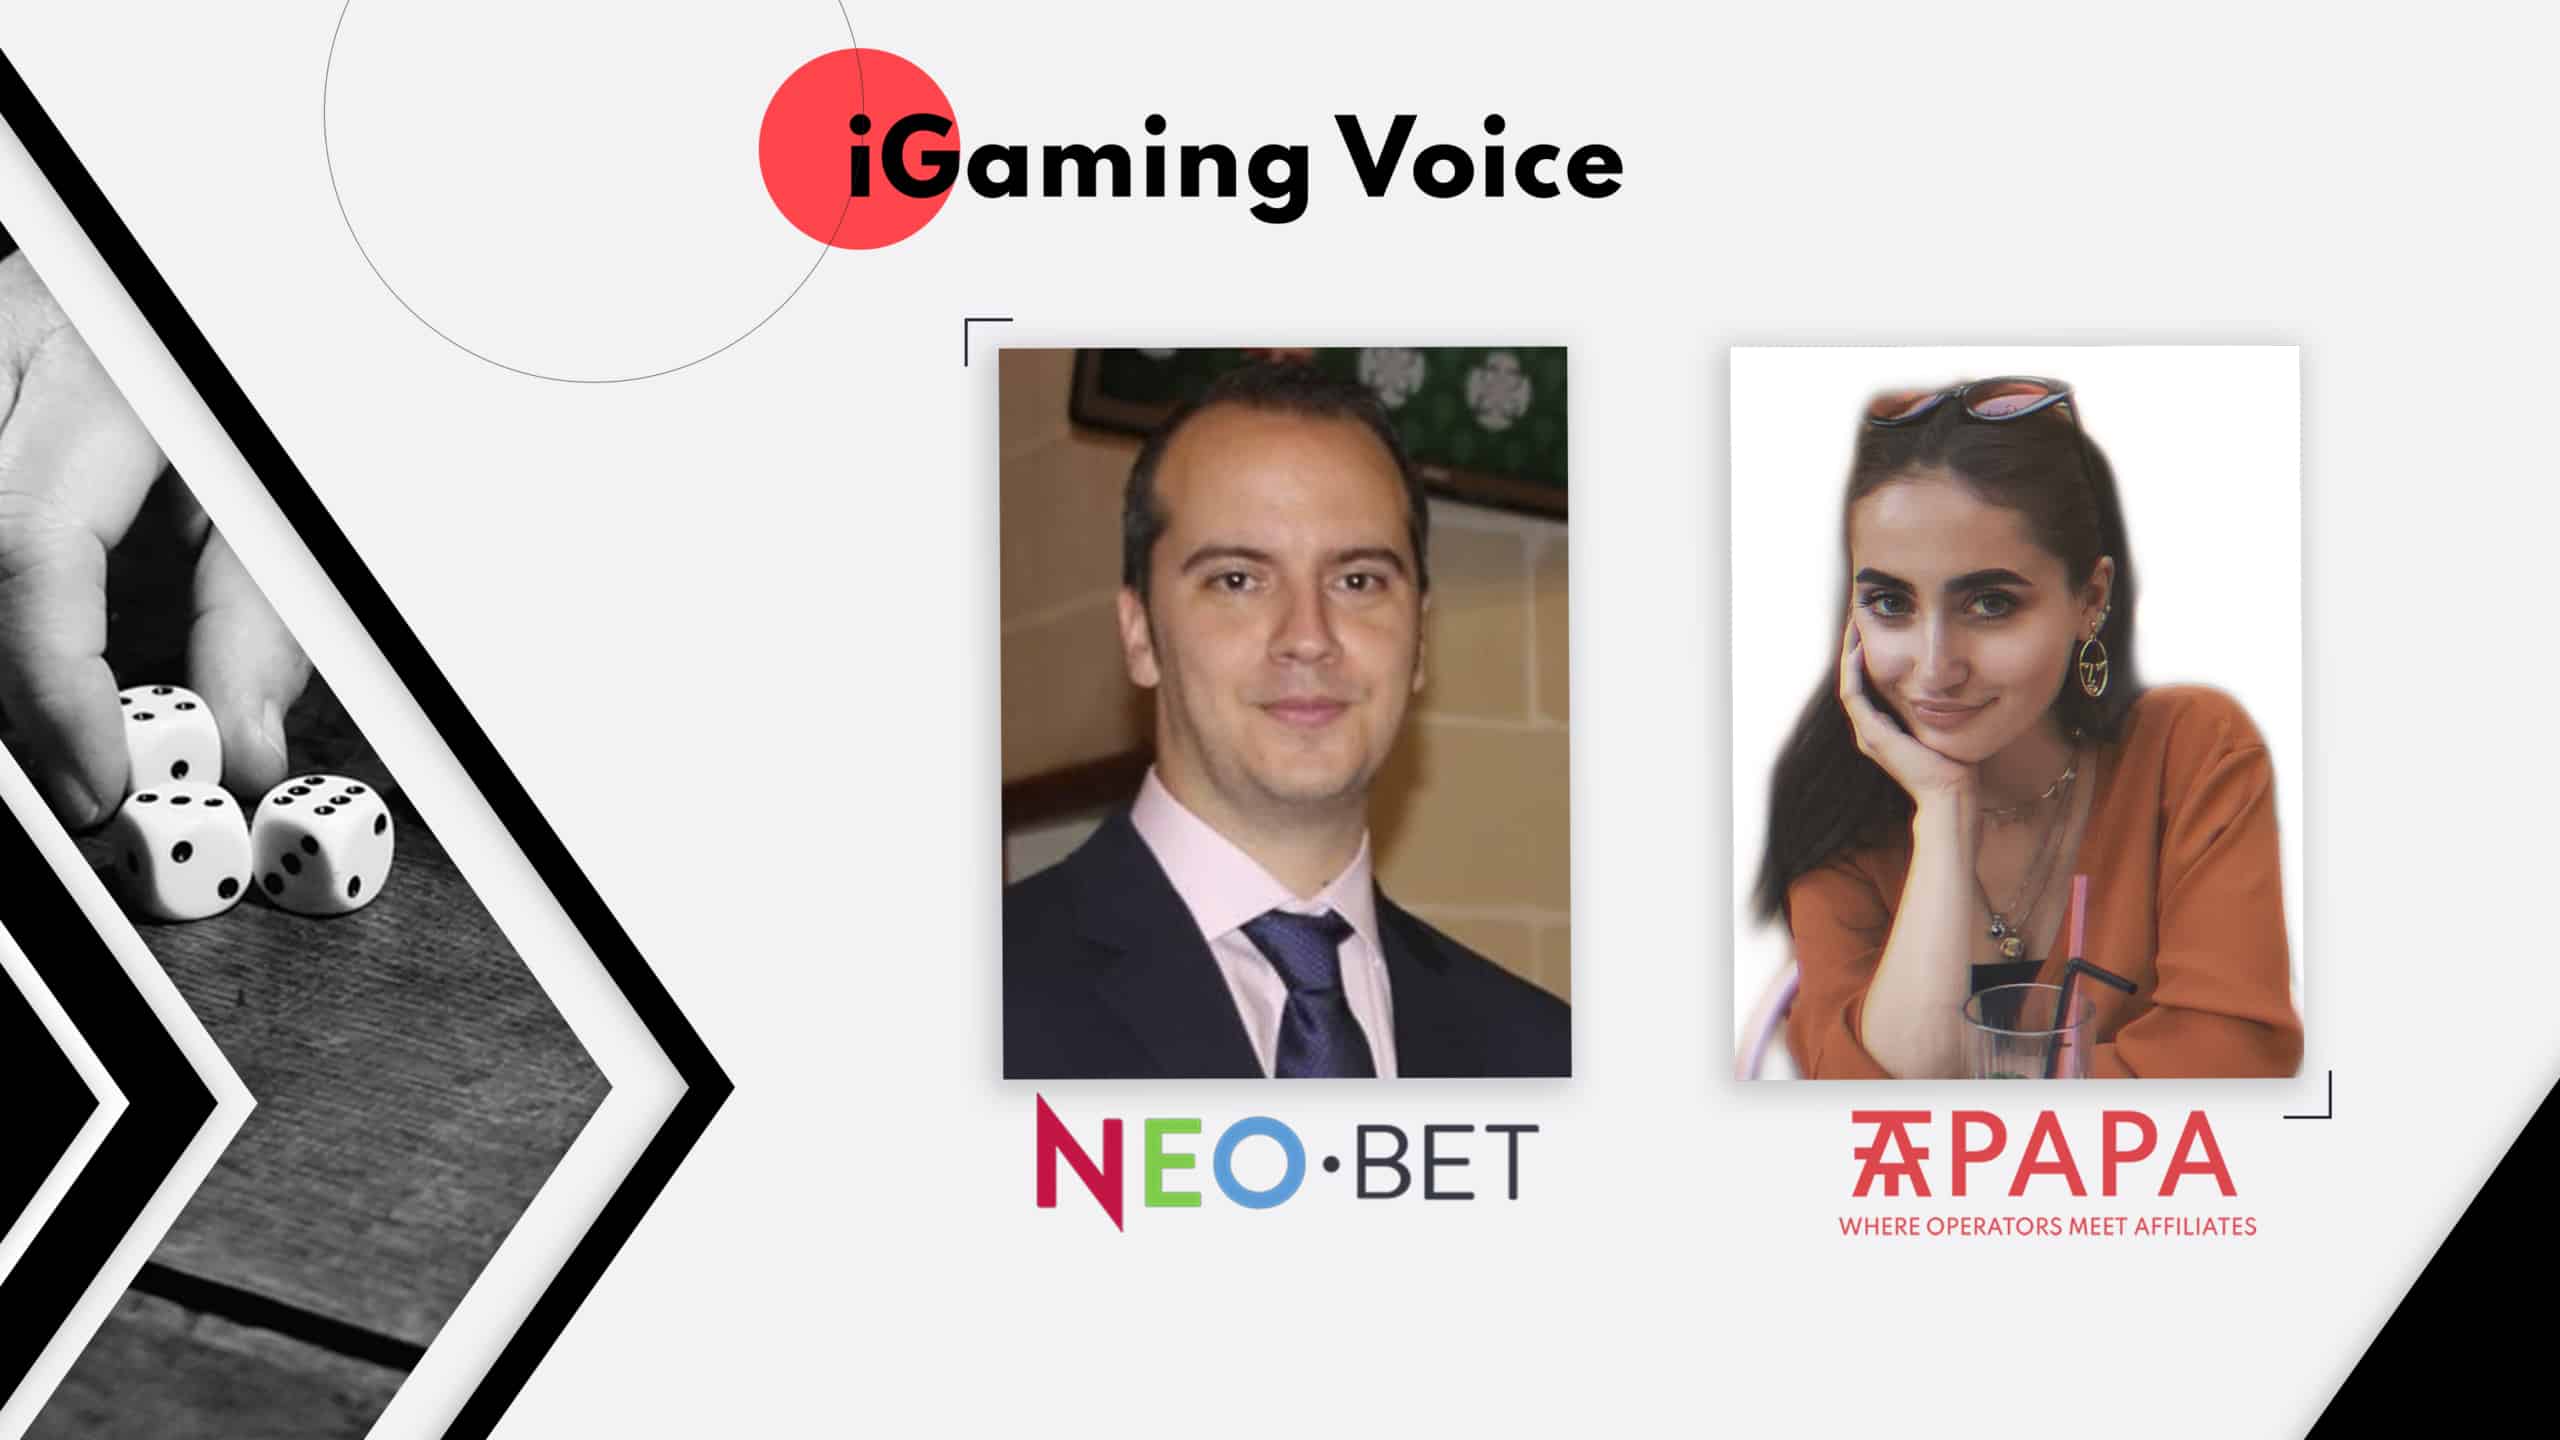 iGaming voice by Yeva: NEO.bet